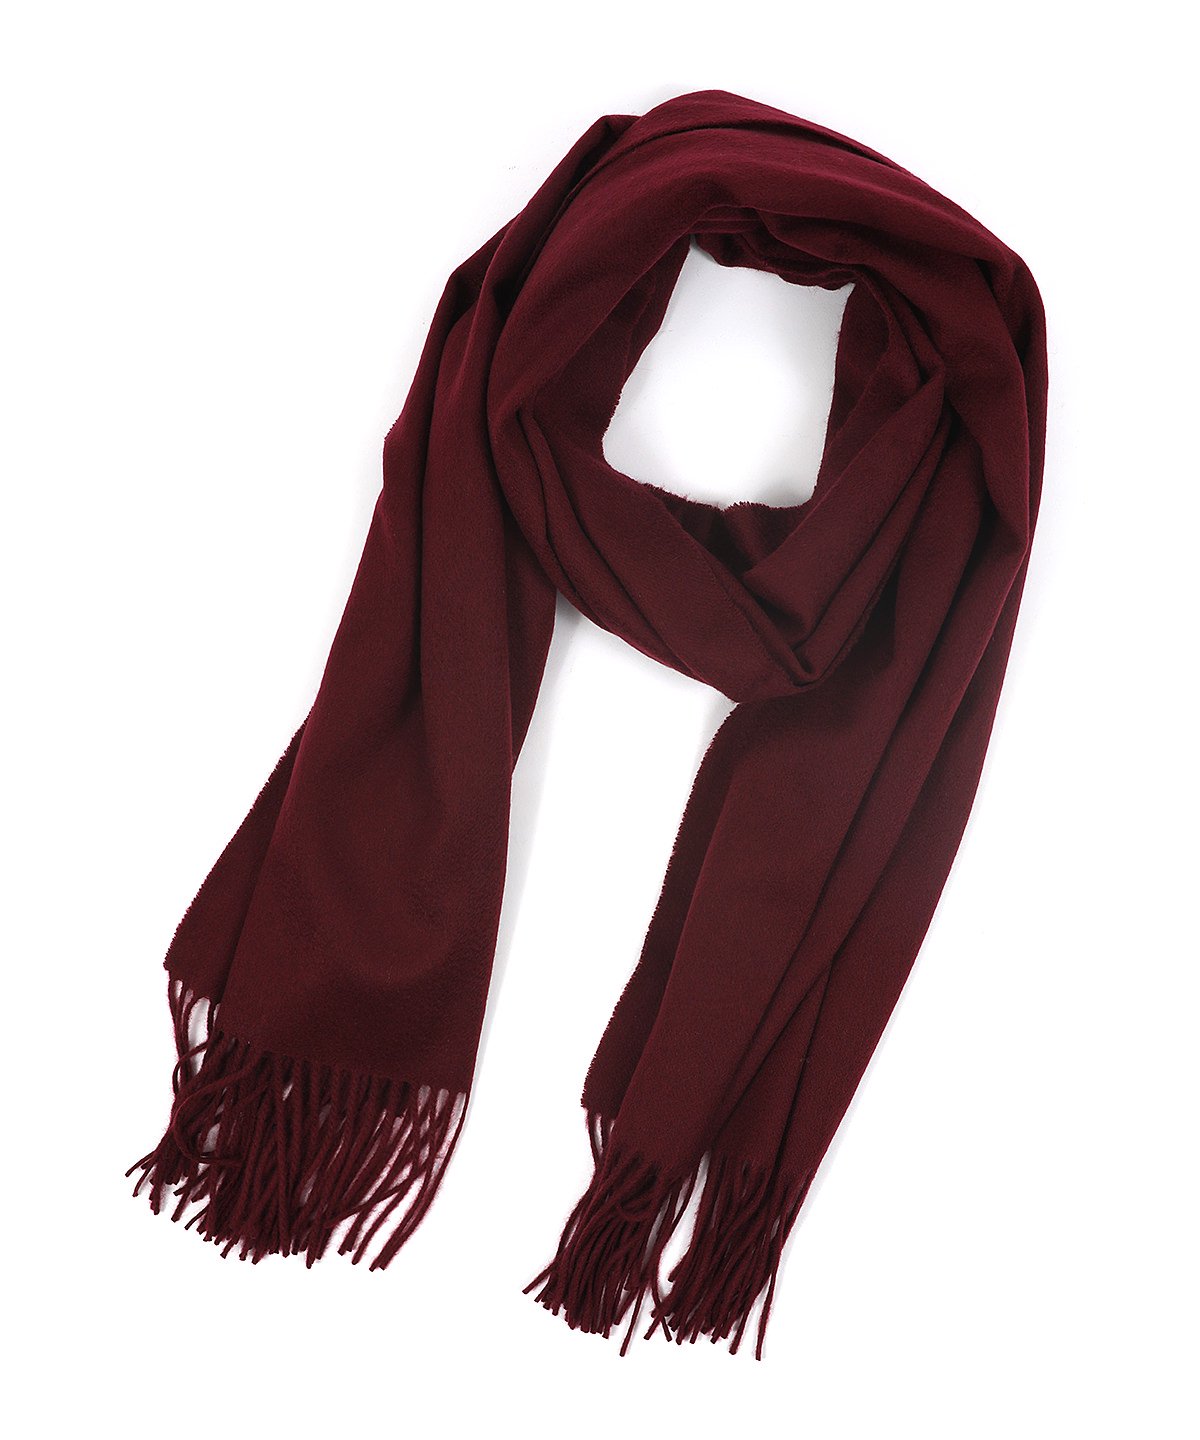 YOUNG'S BEST CASHMERE SCARF